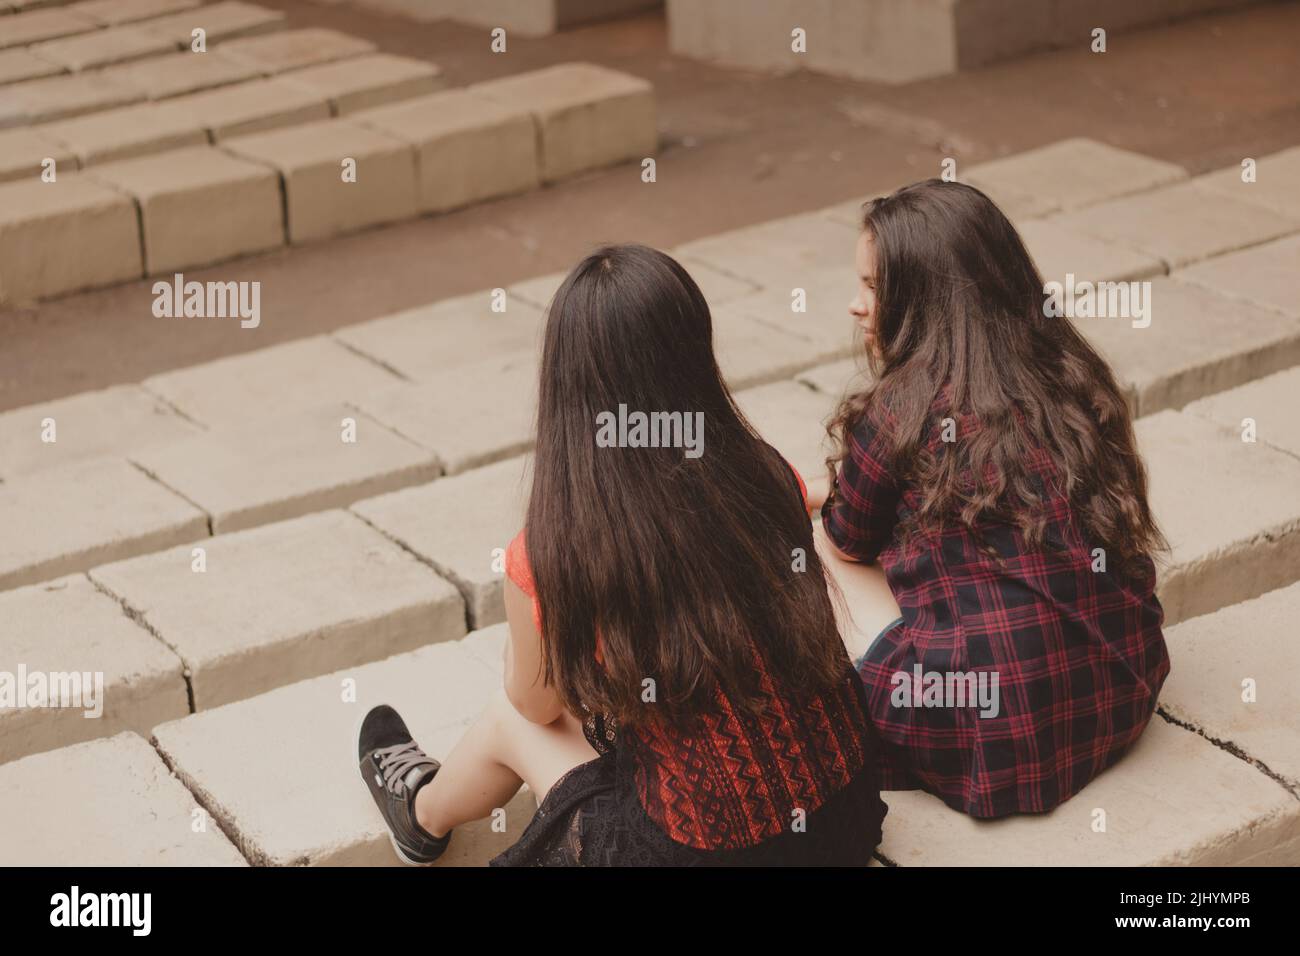 two young woman backwards sitting next to each other Stock Photo